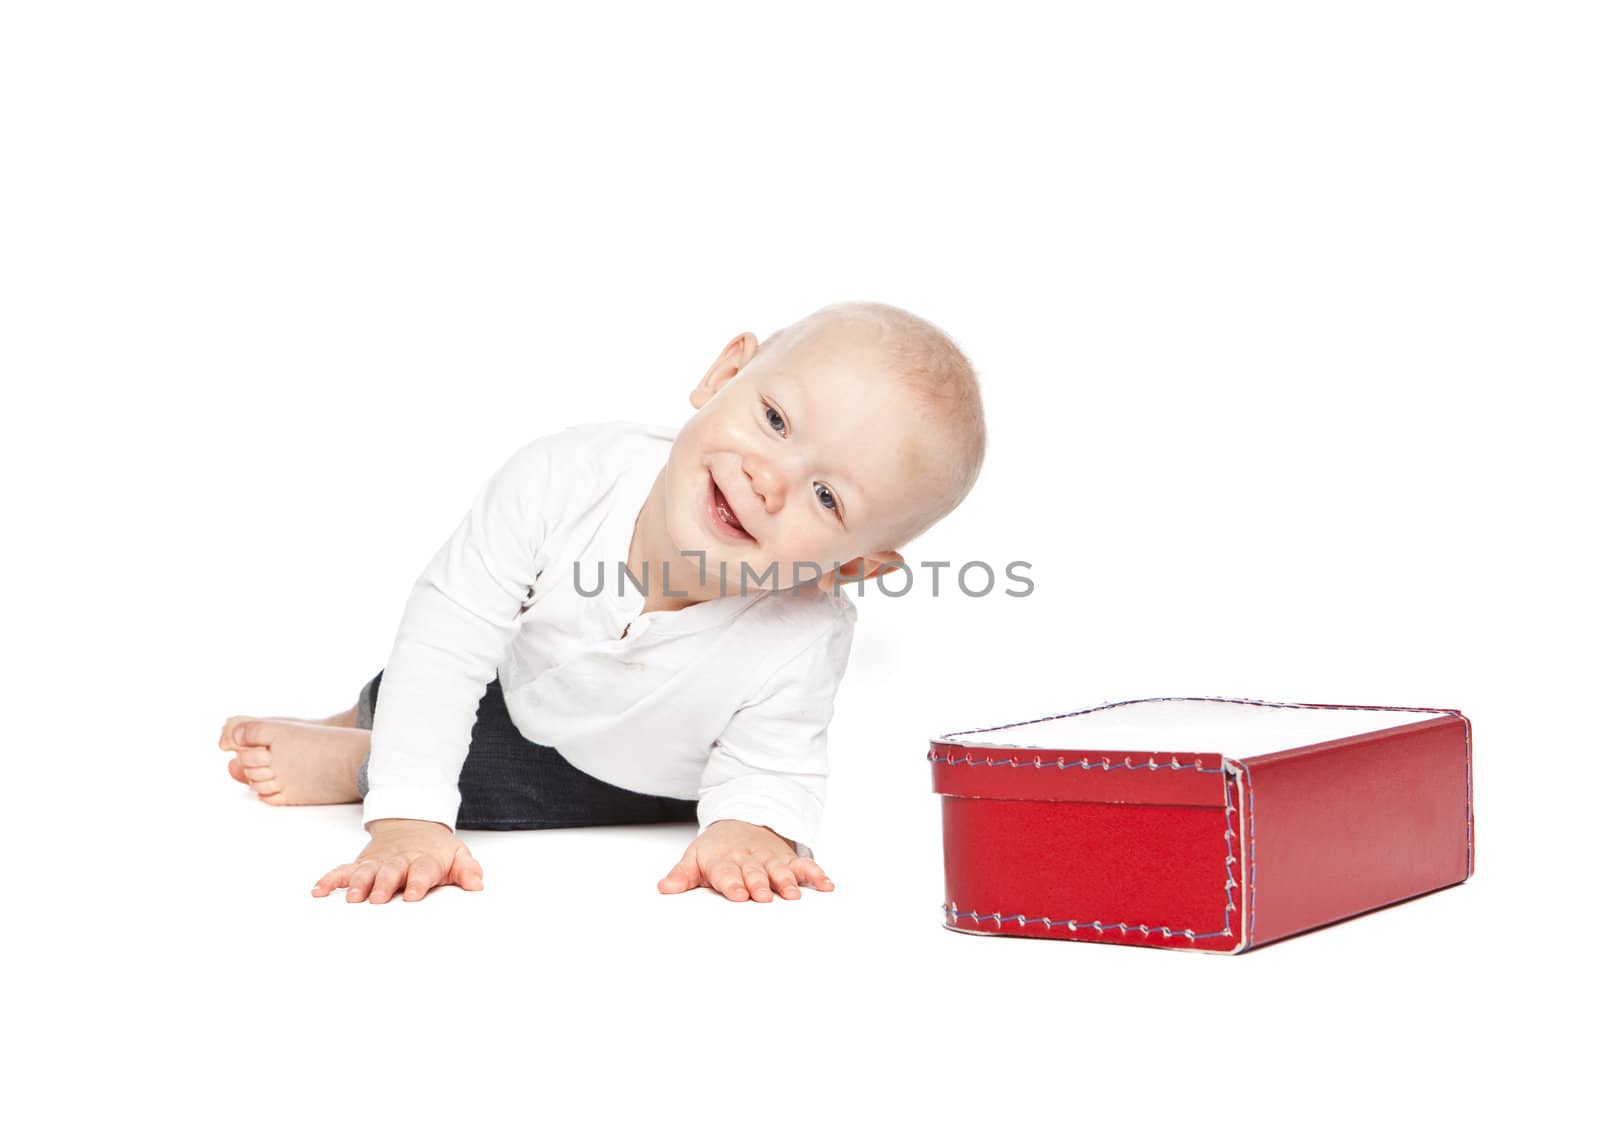 A boy and his red lunchbox isolated on a white background